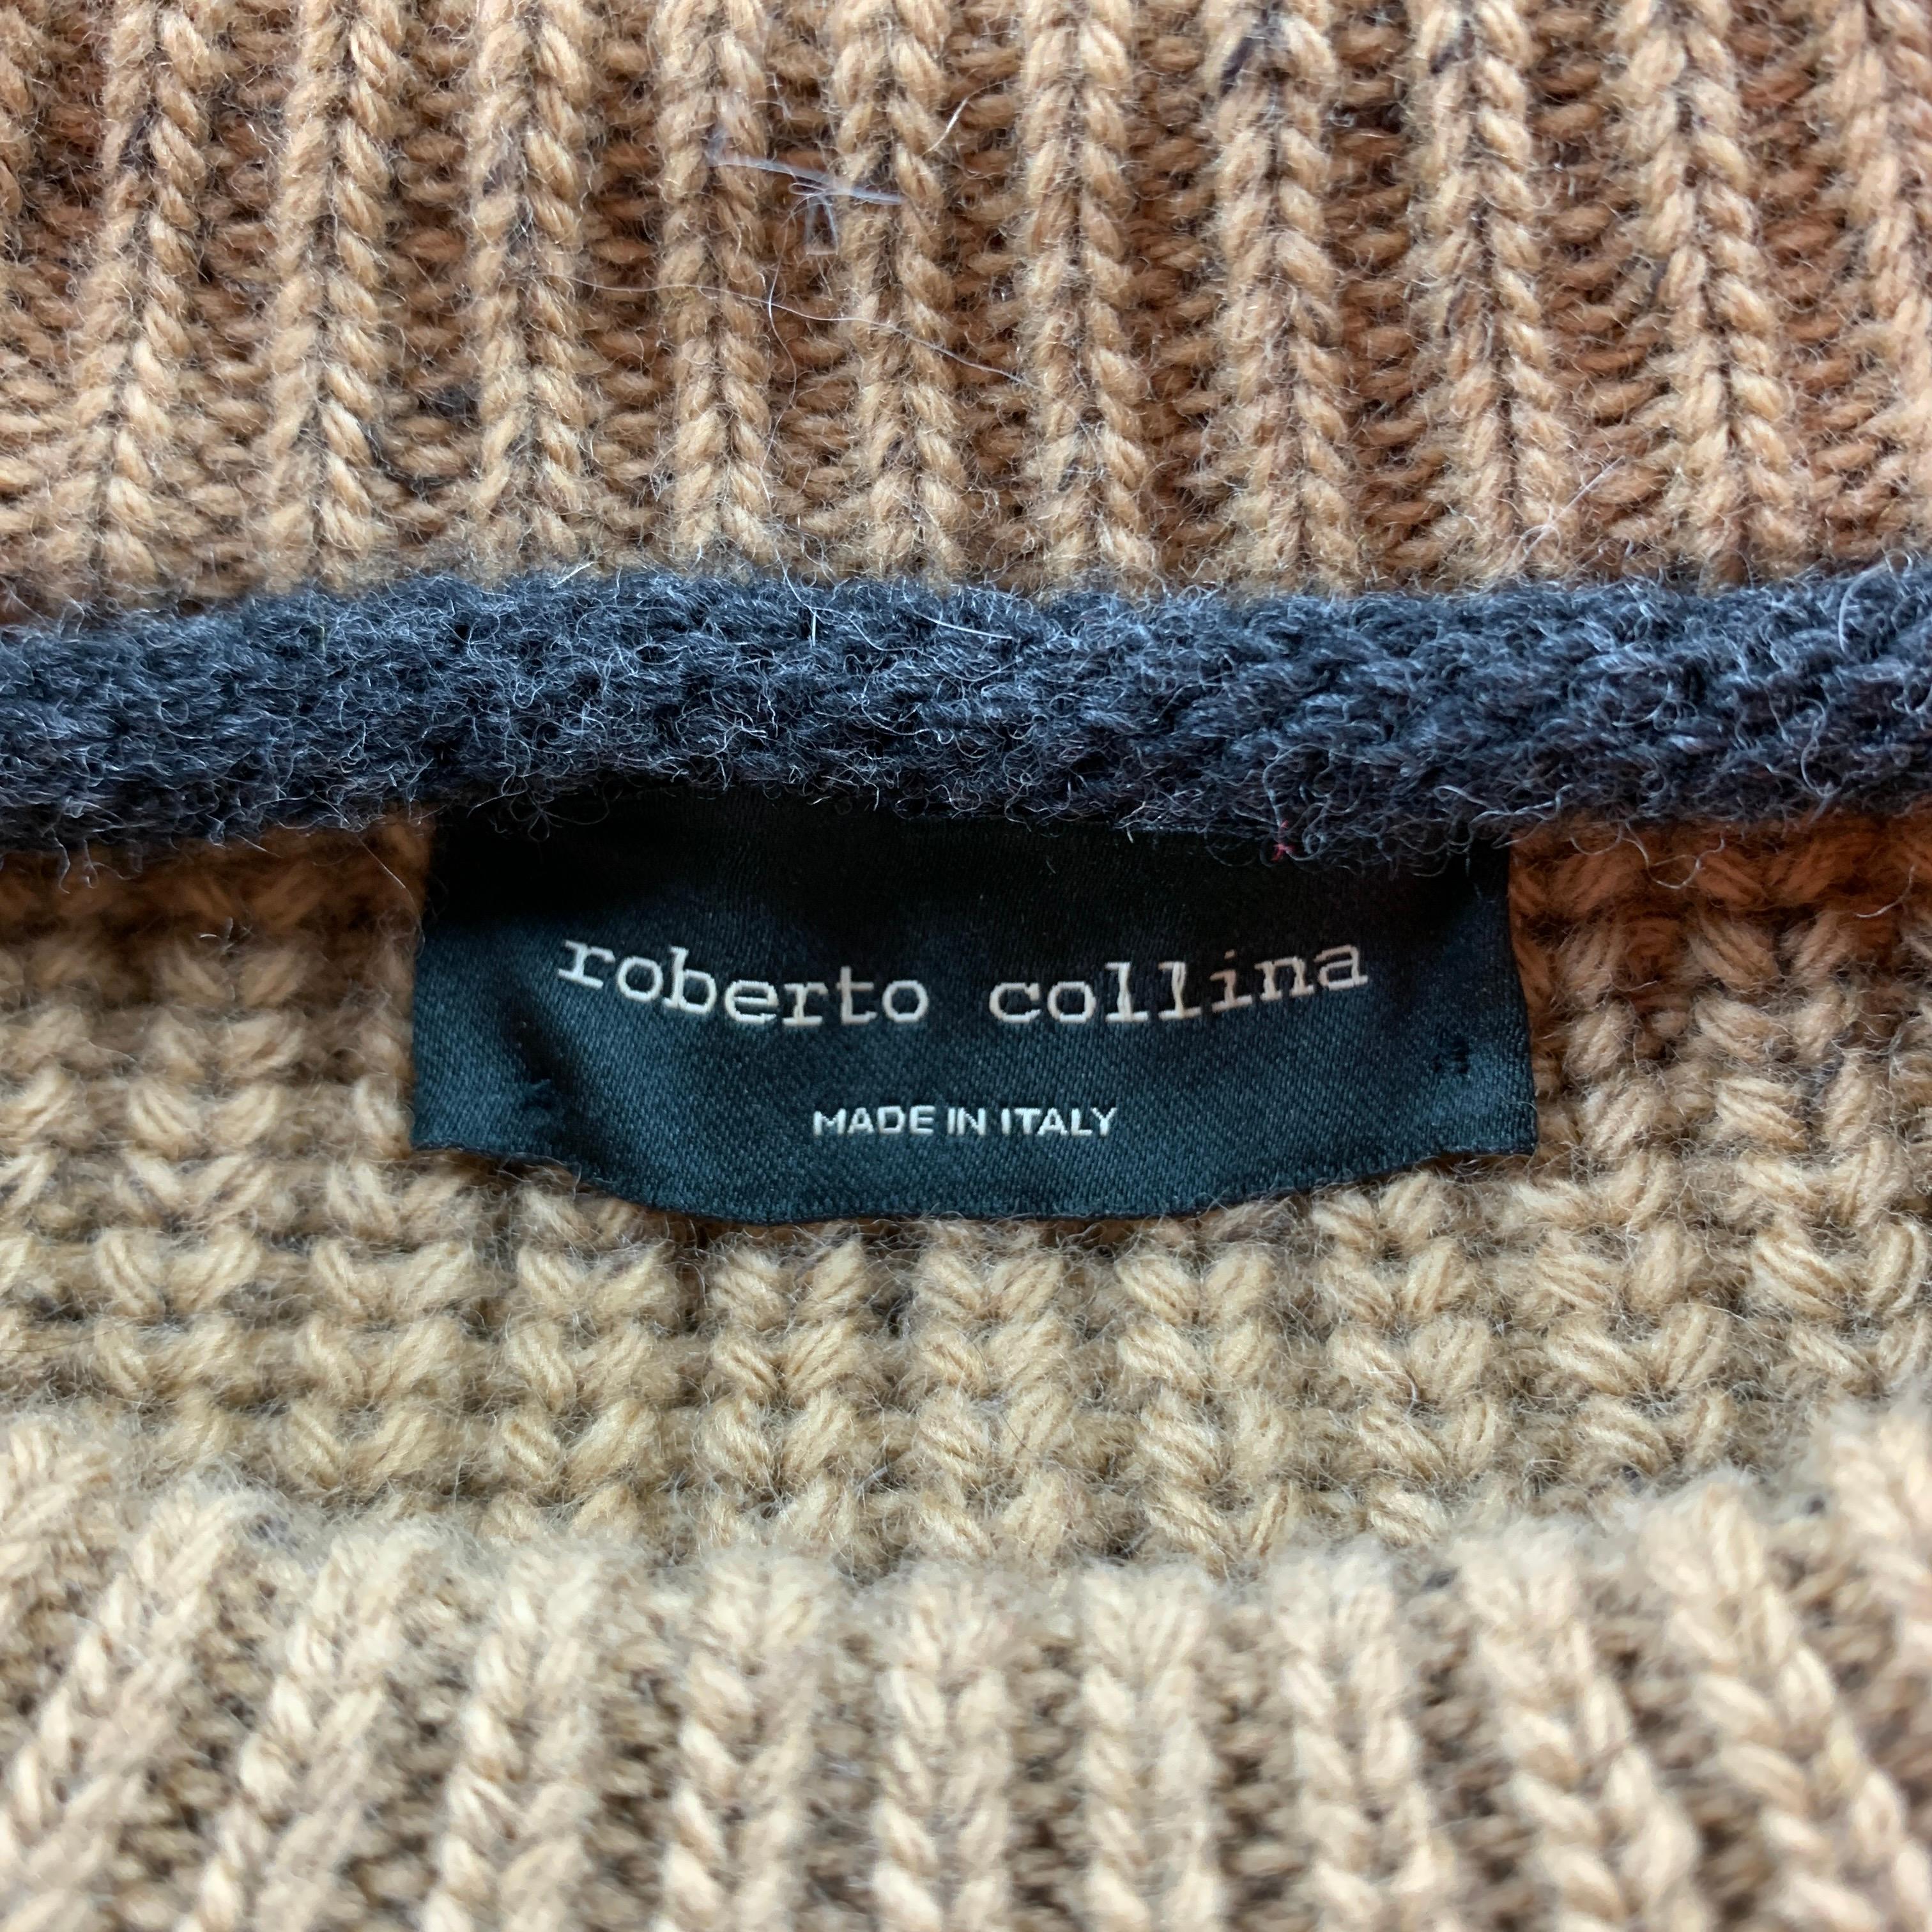 ROBERTO COLLINA Size L Tan & Grey Knitted Wool Blend Crew-Neck Sweater 1